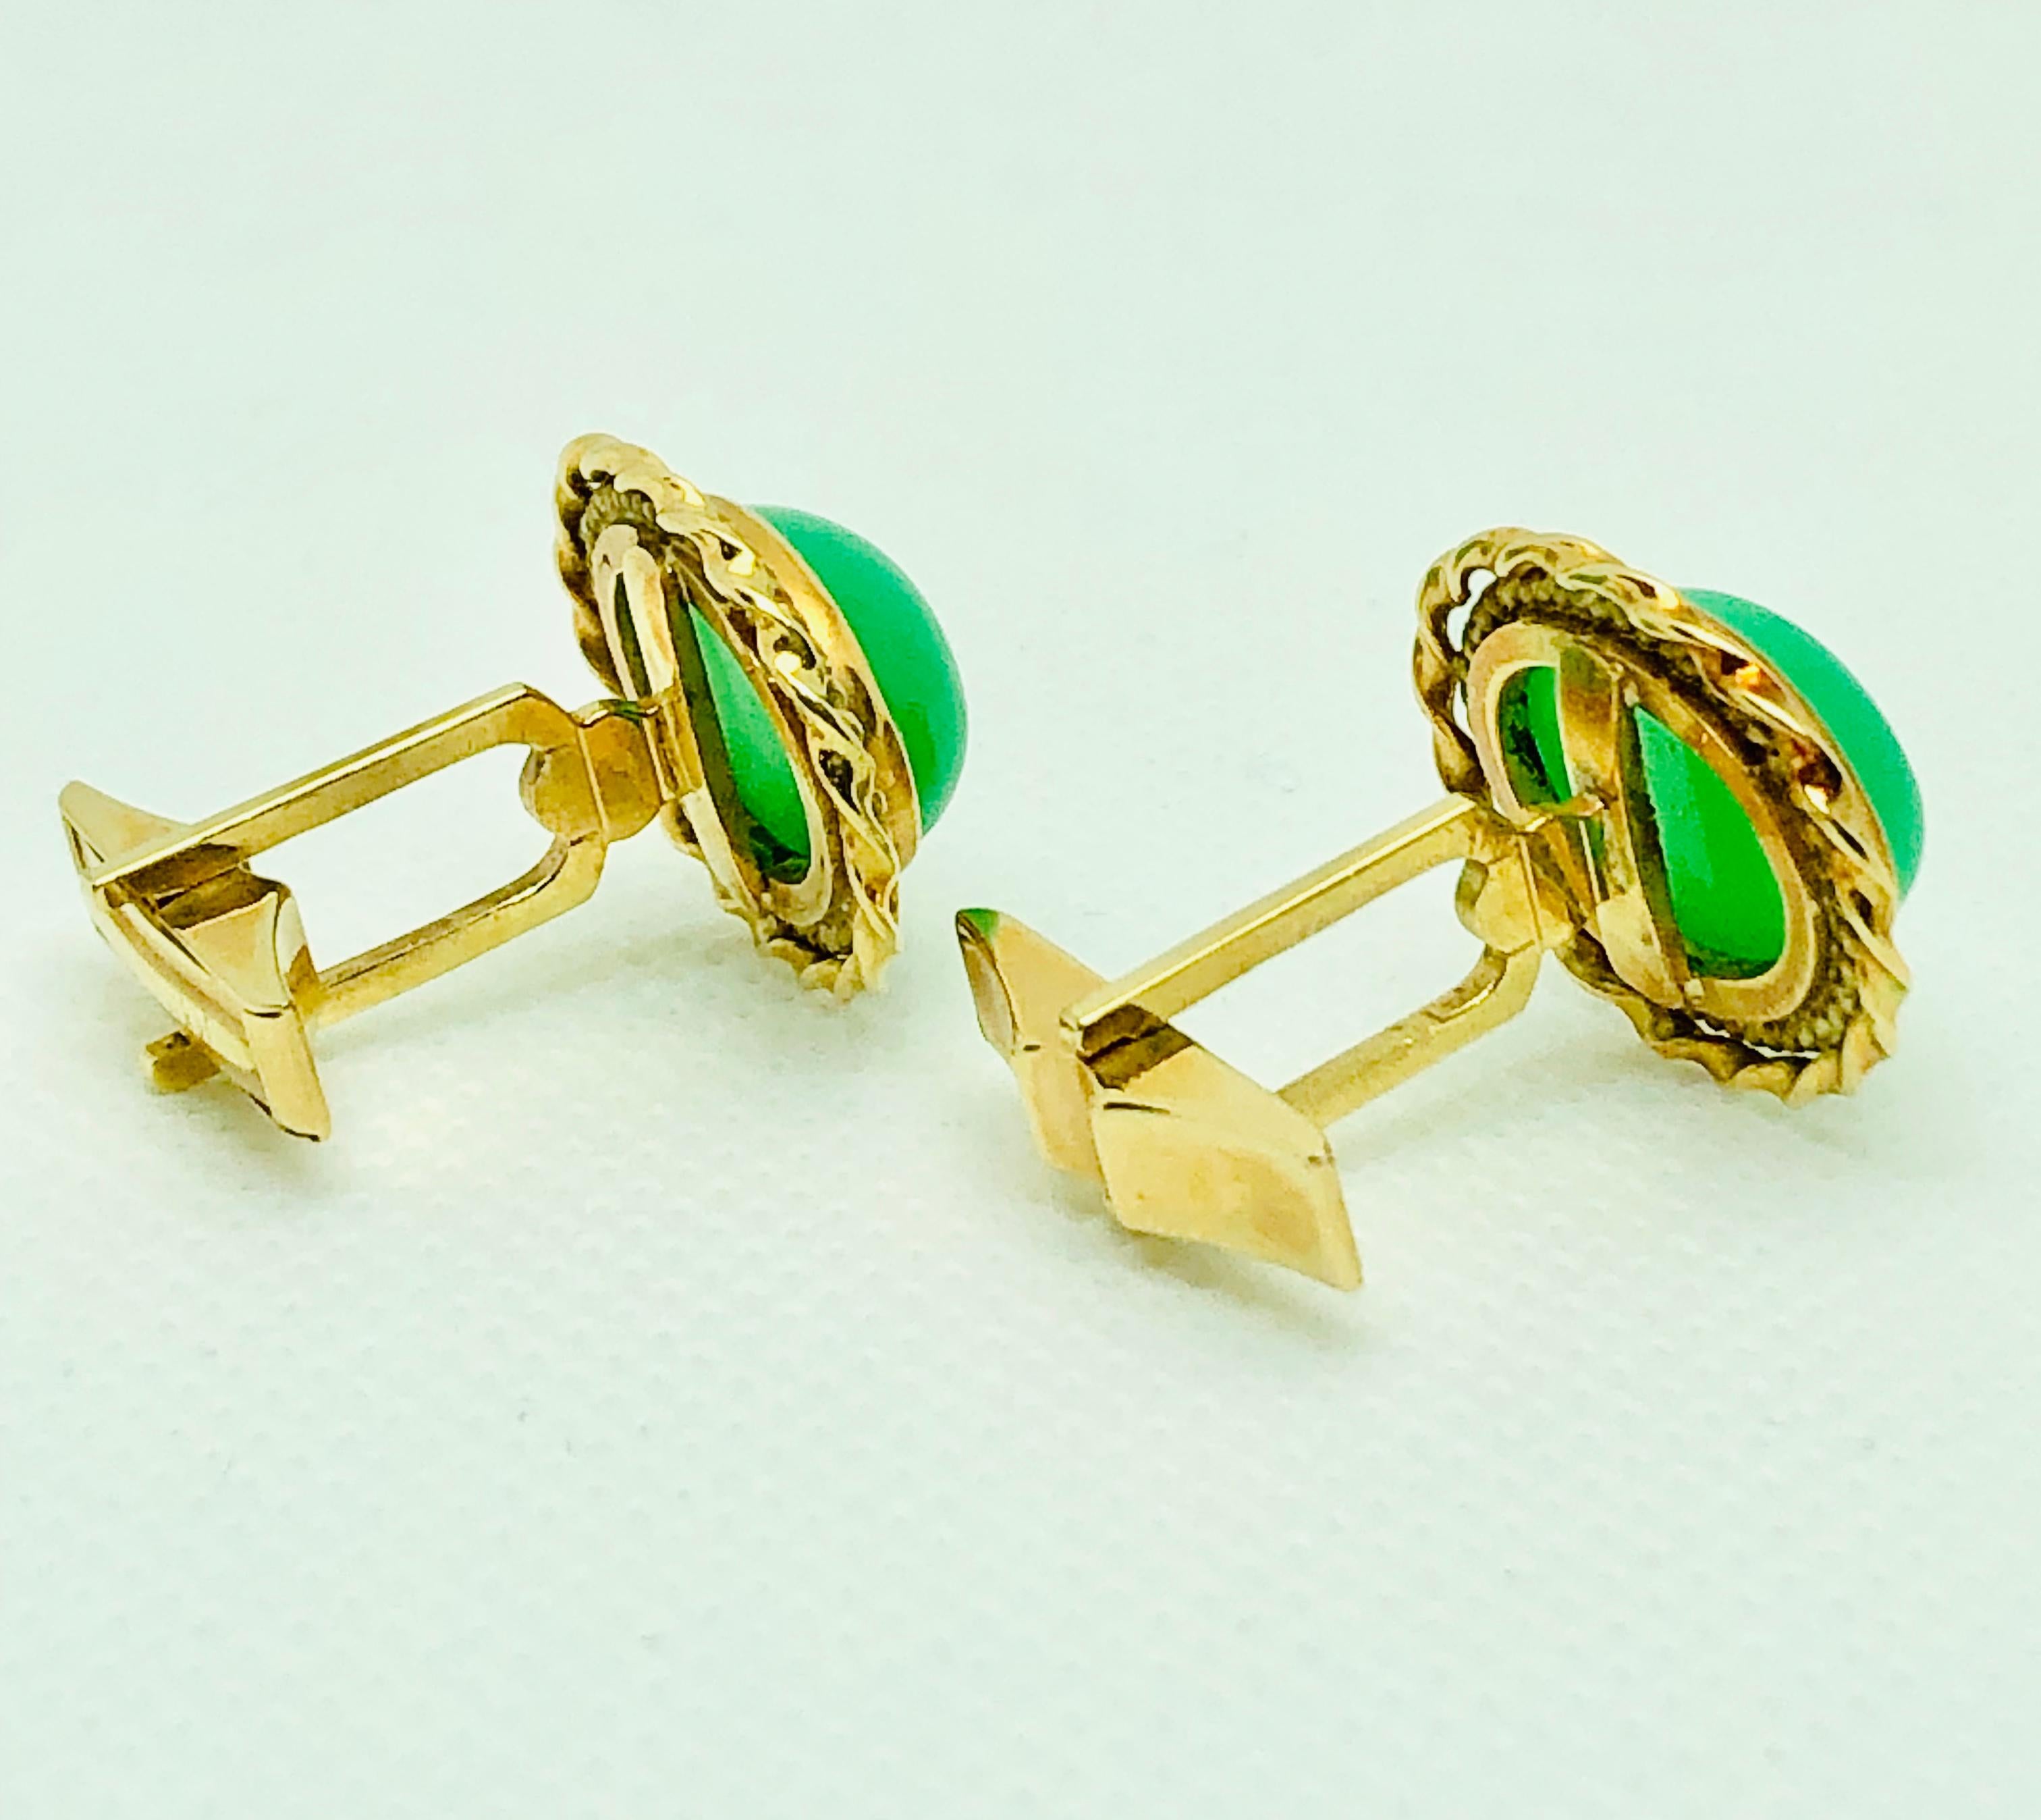 Cabochon Vintage 14 Karat Yellow Gold and Chalcedony Oval Cufflinks